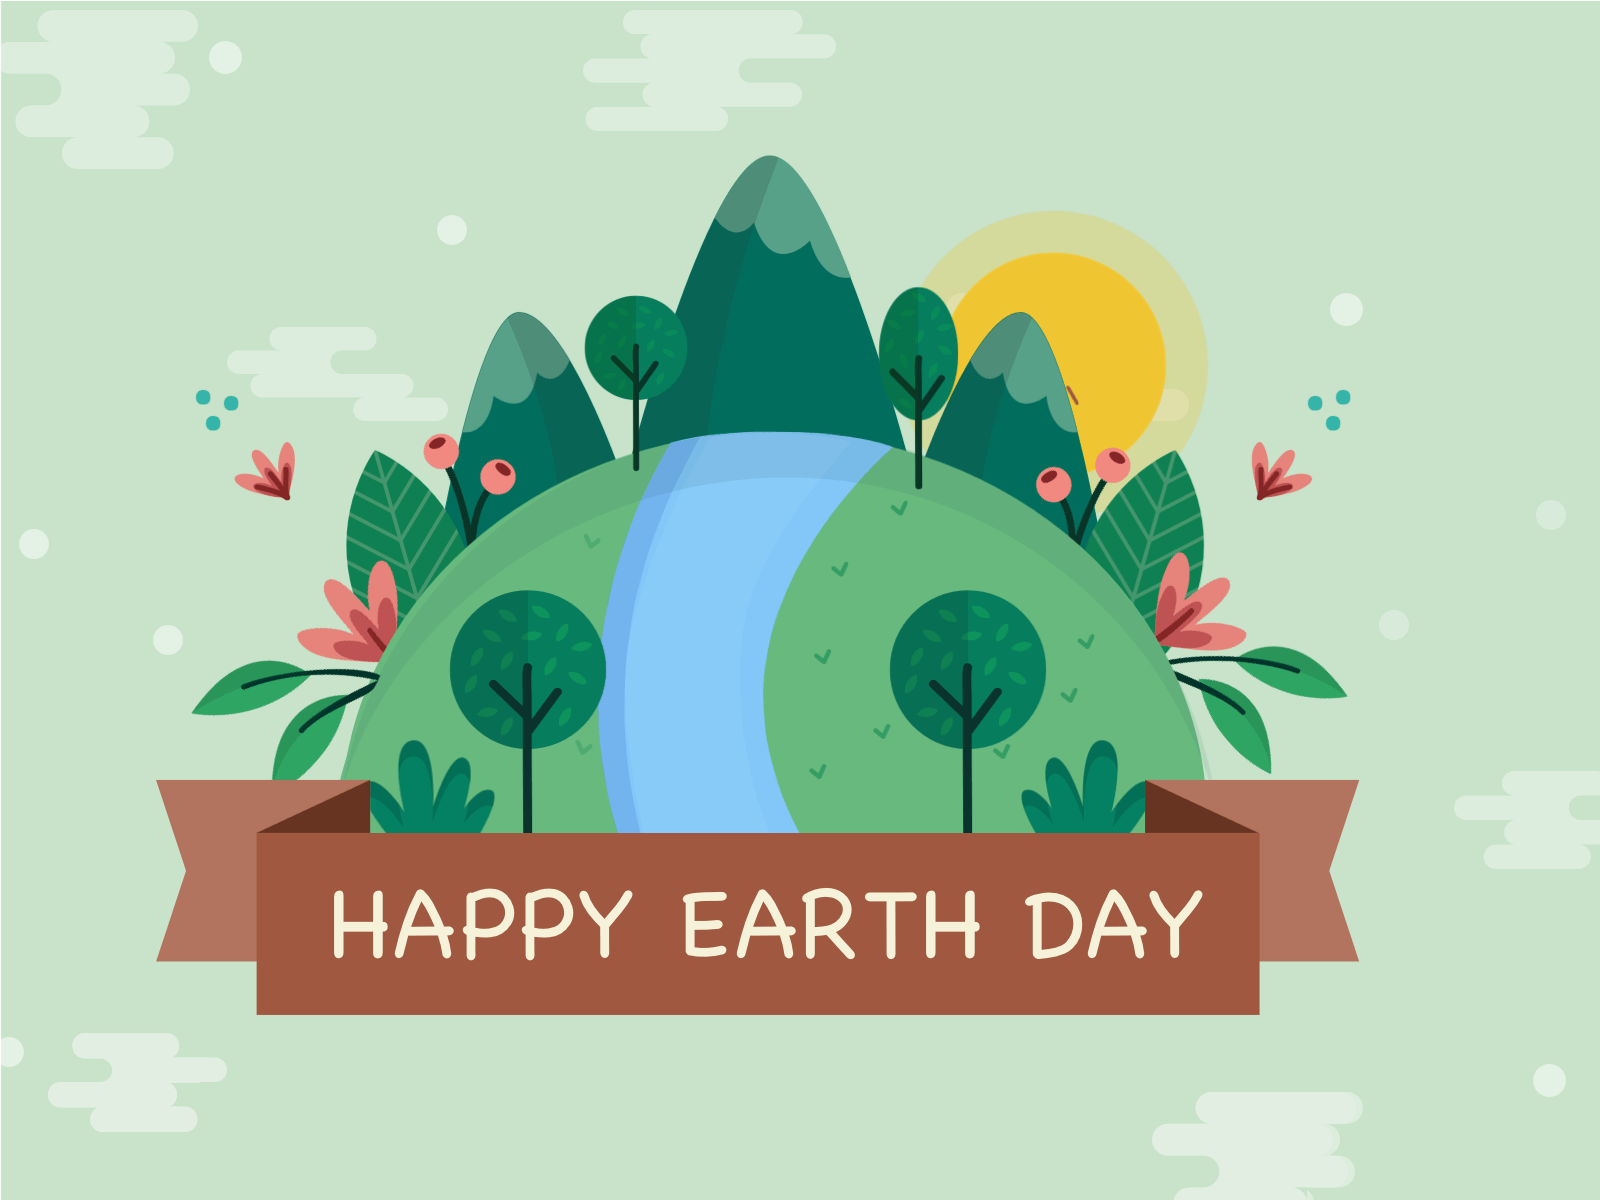 Happy Earth Day 2021 agency design earth day earthday environment graphic design illustration professional save planet upqode webdesign